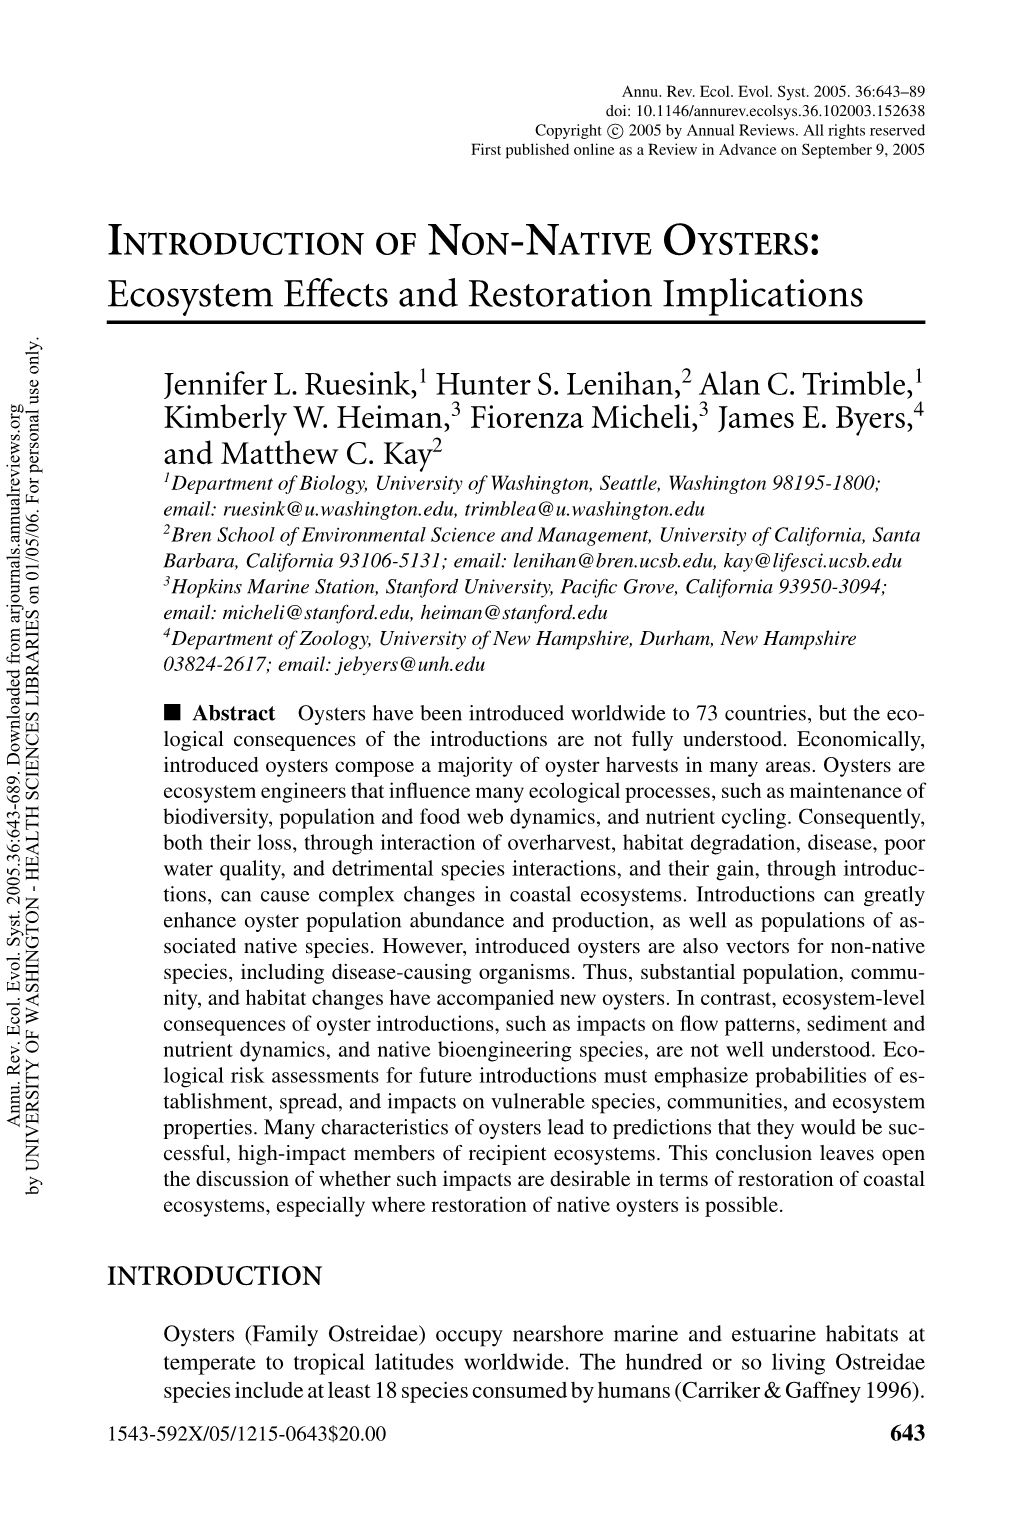 INTRODUCTION of NON-NATIVE OYSTERS: Ecosystem Effects and Restoration Implications